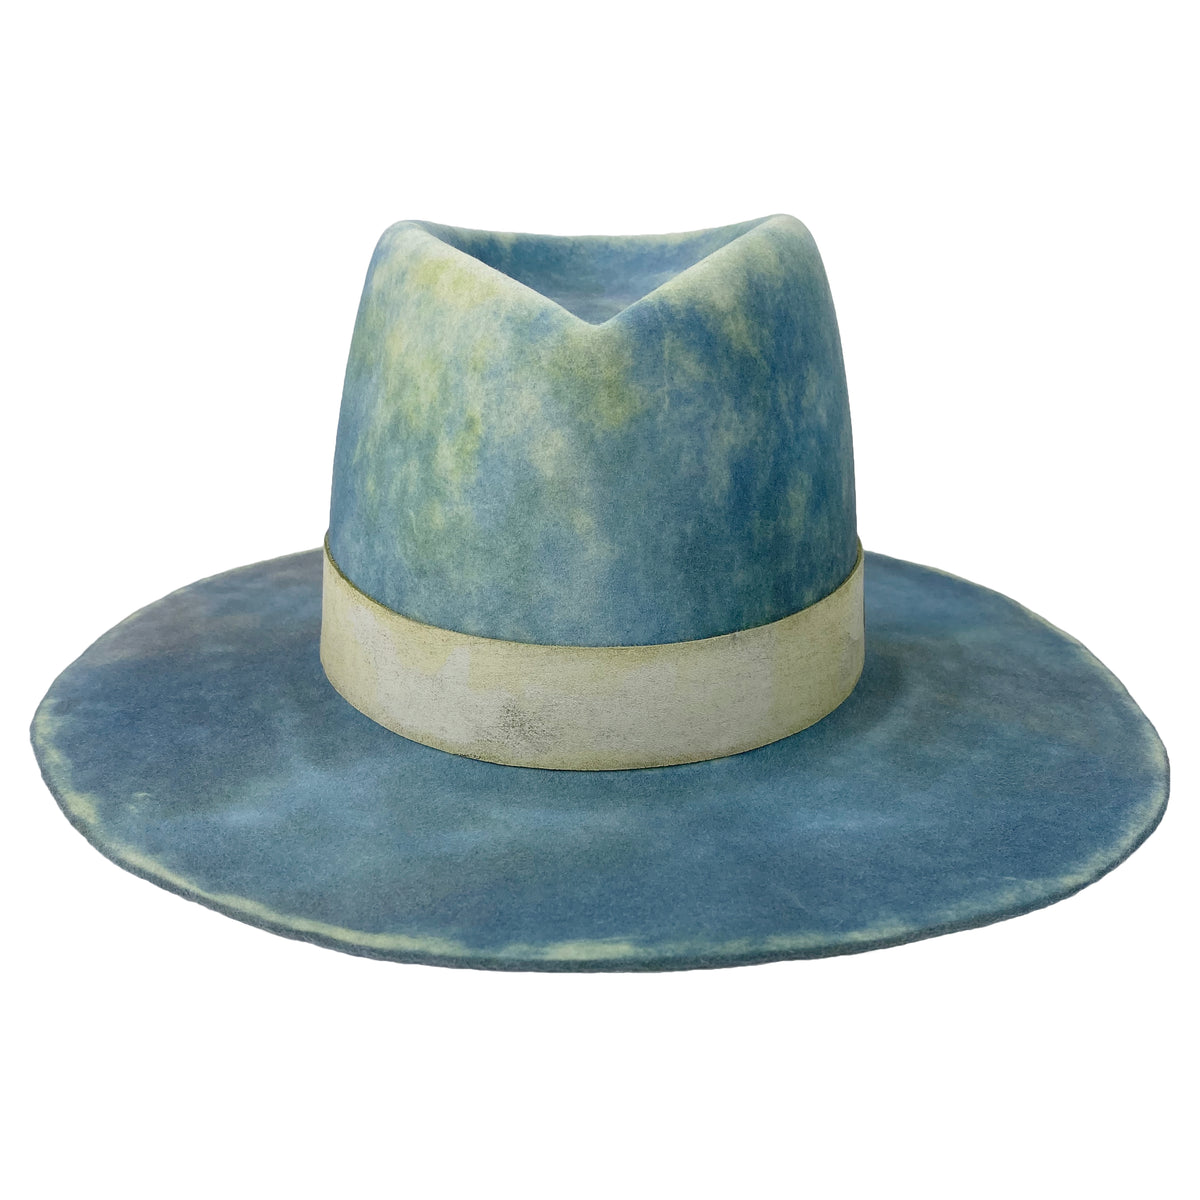 custom leather hatband and hand dyed hat body